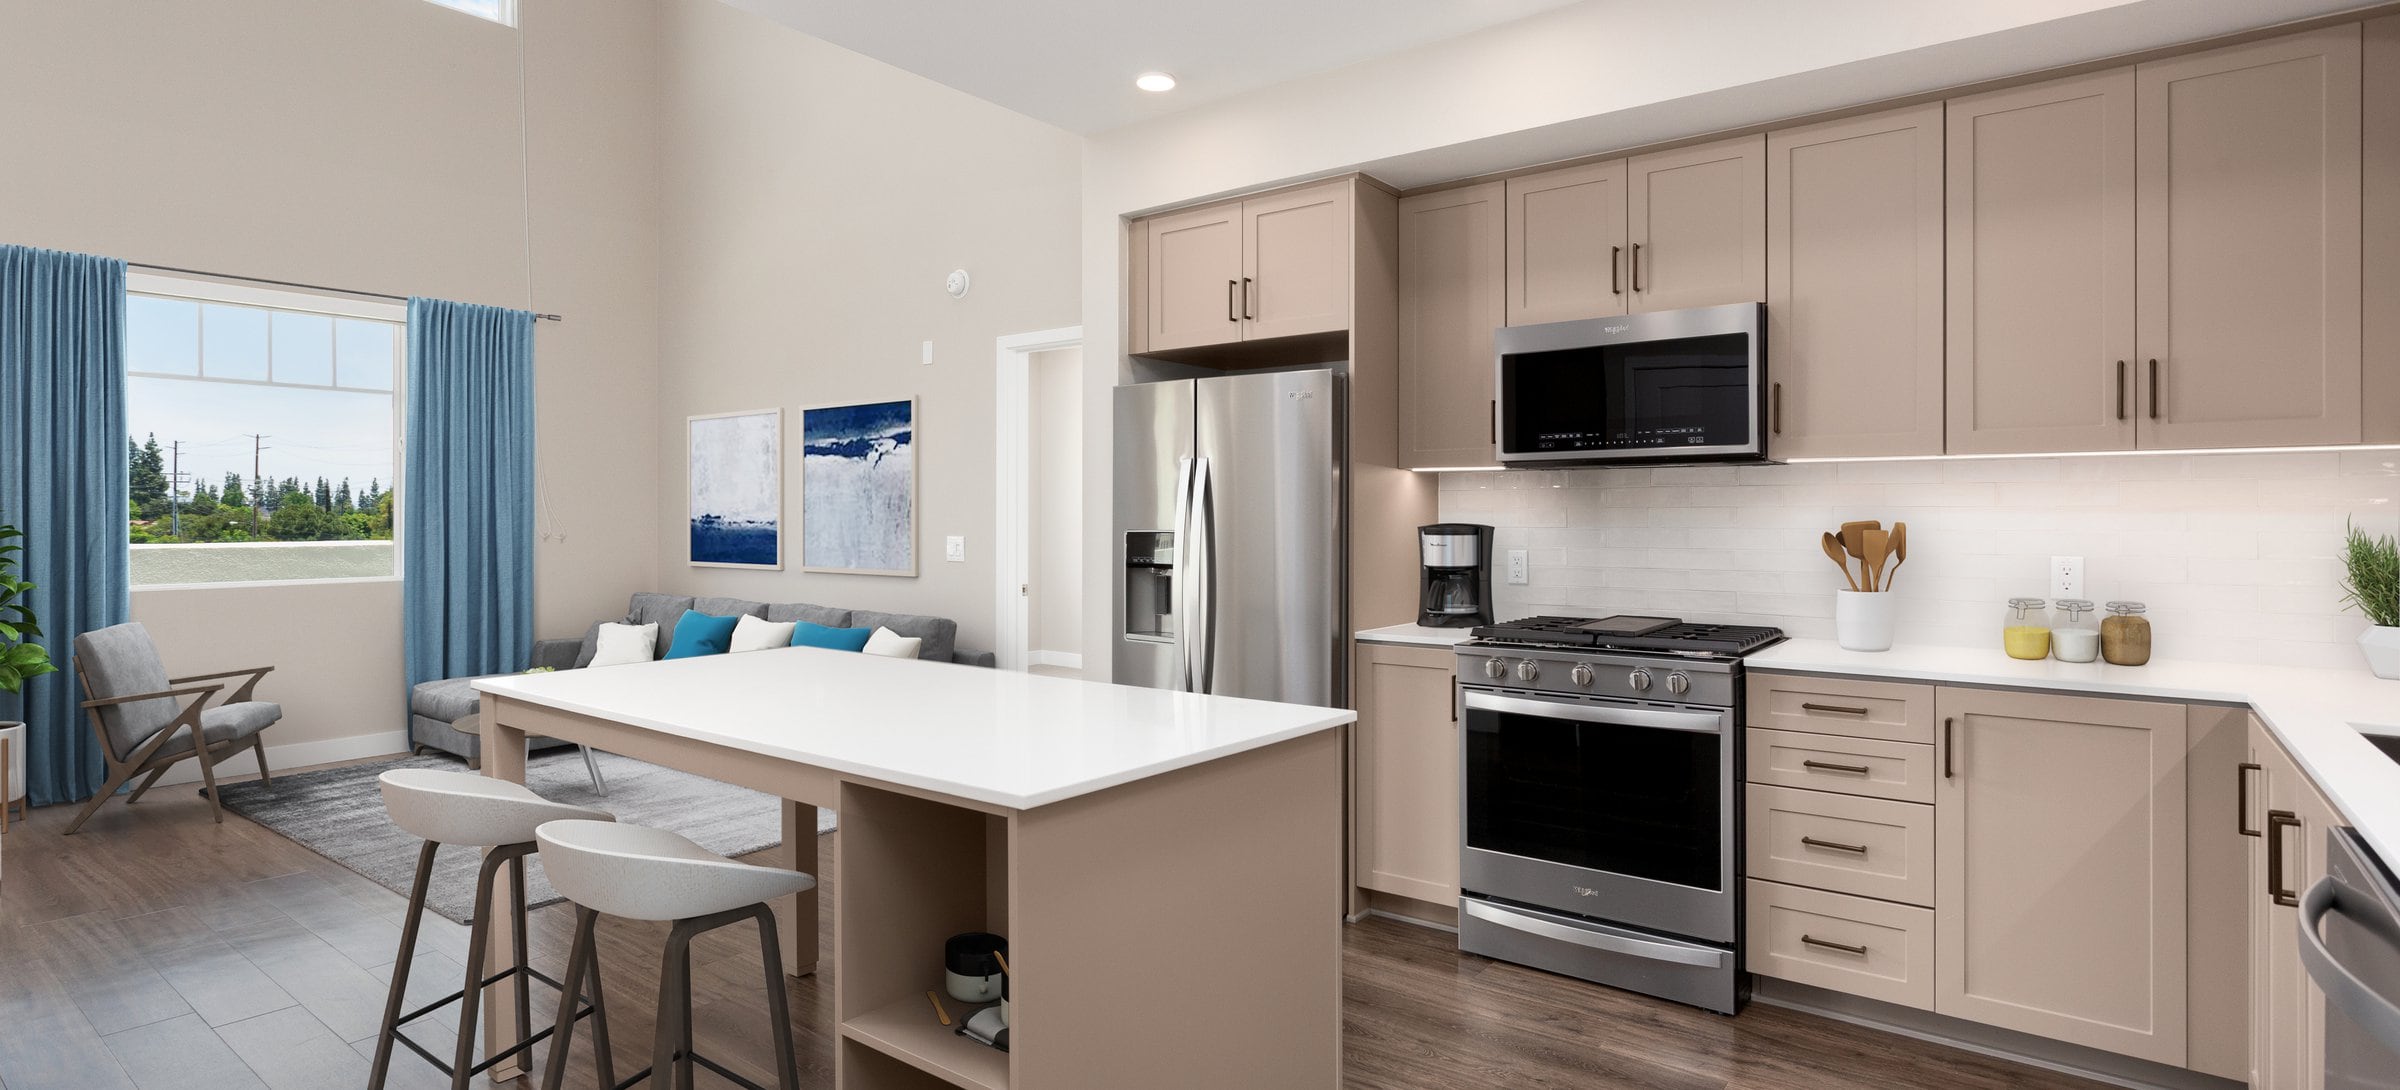 Townhome kitchen and dining area (select homes)